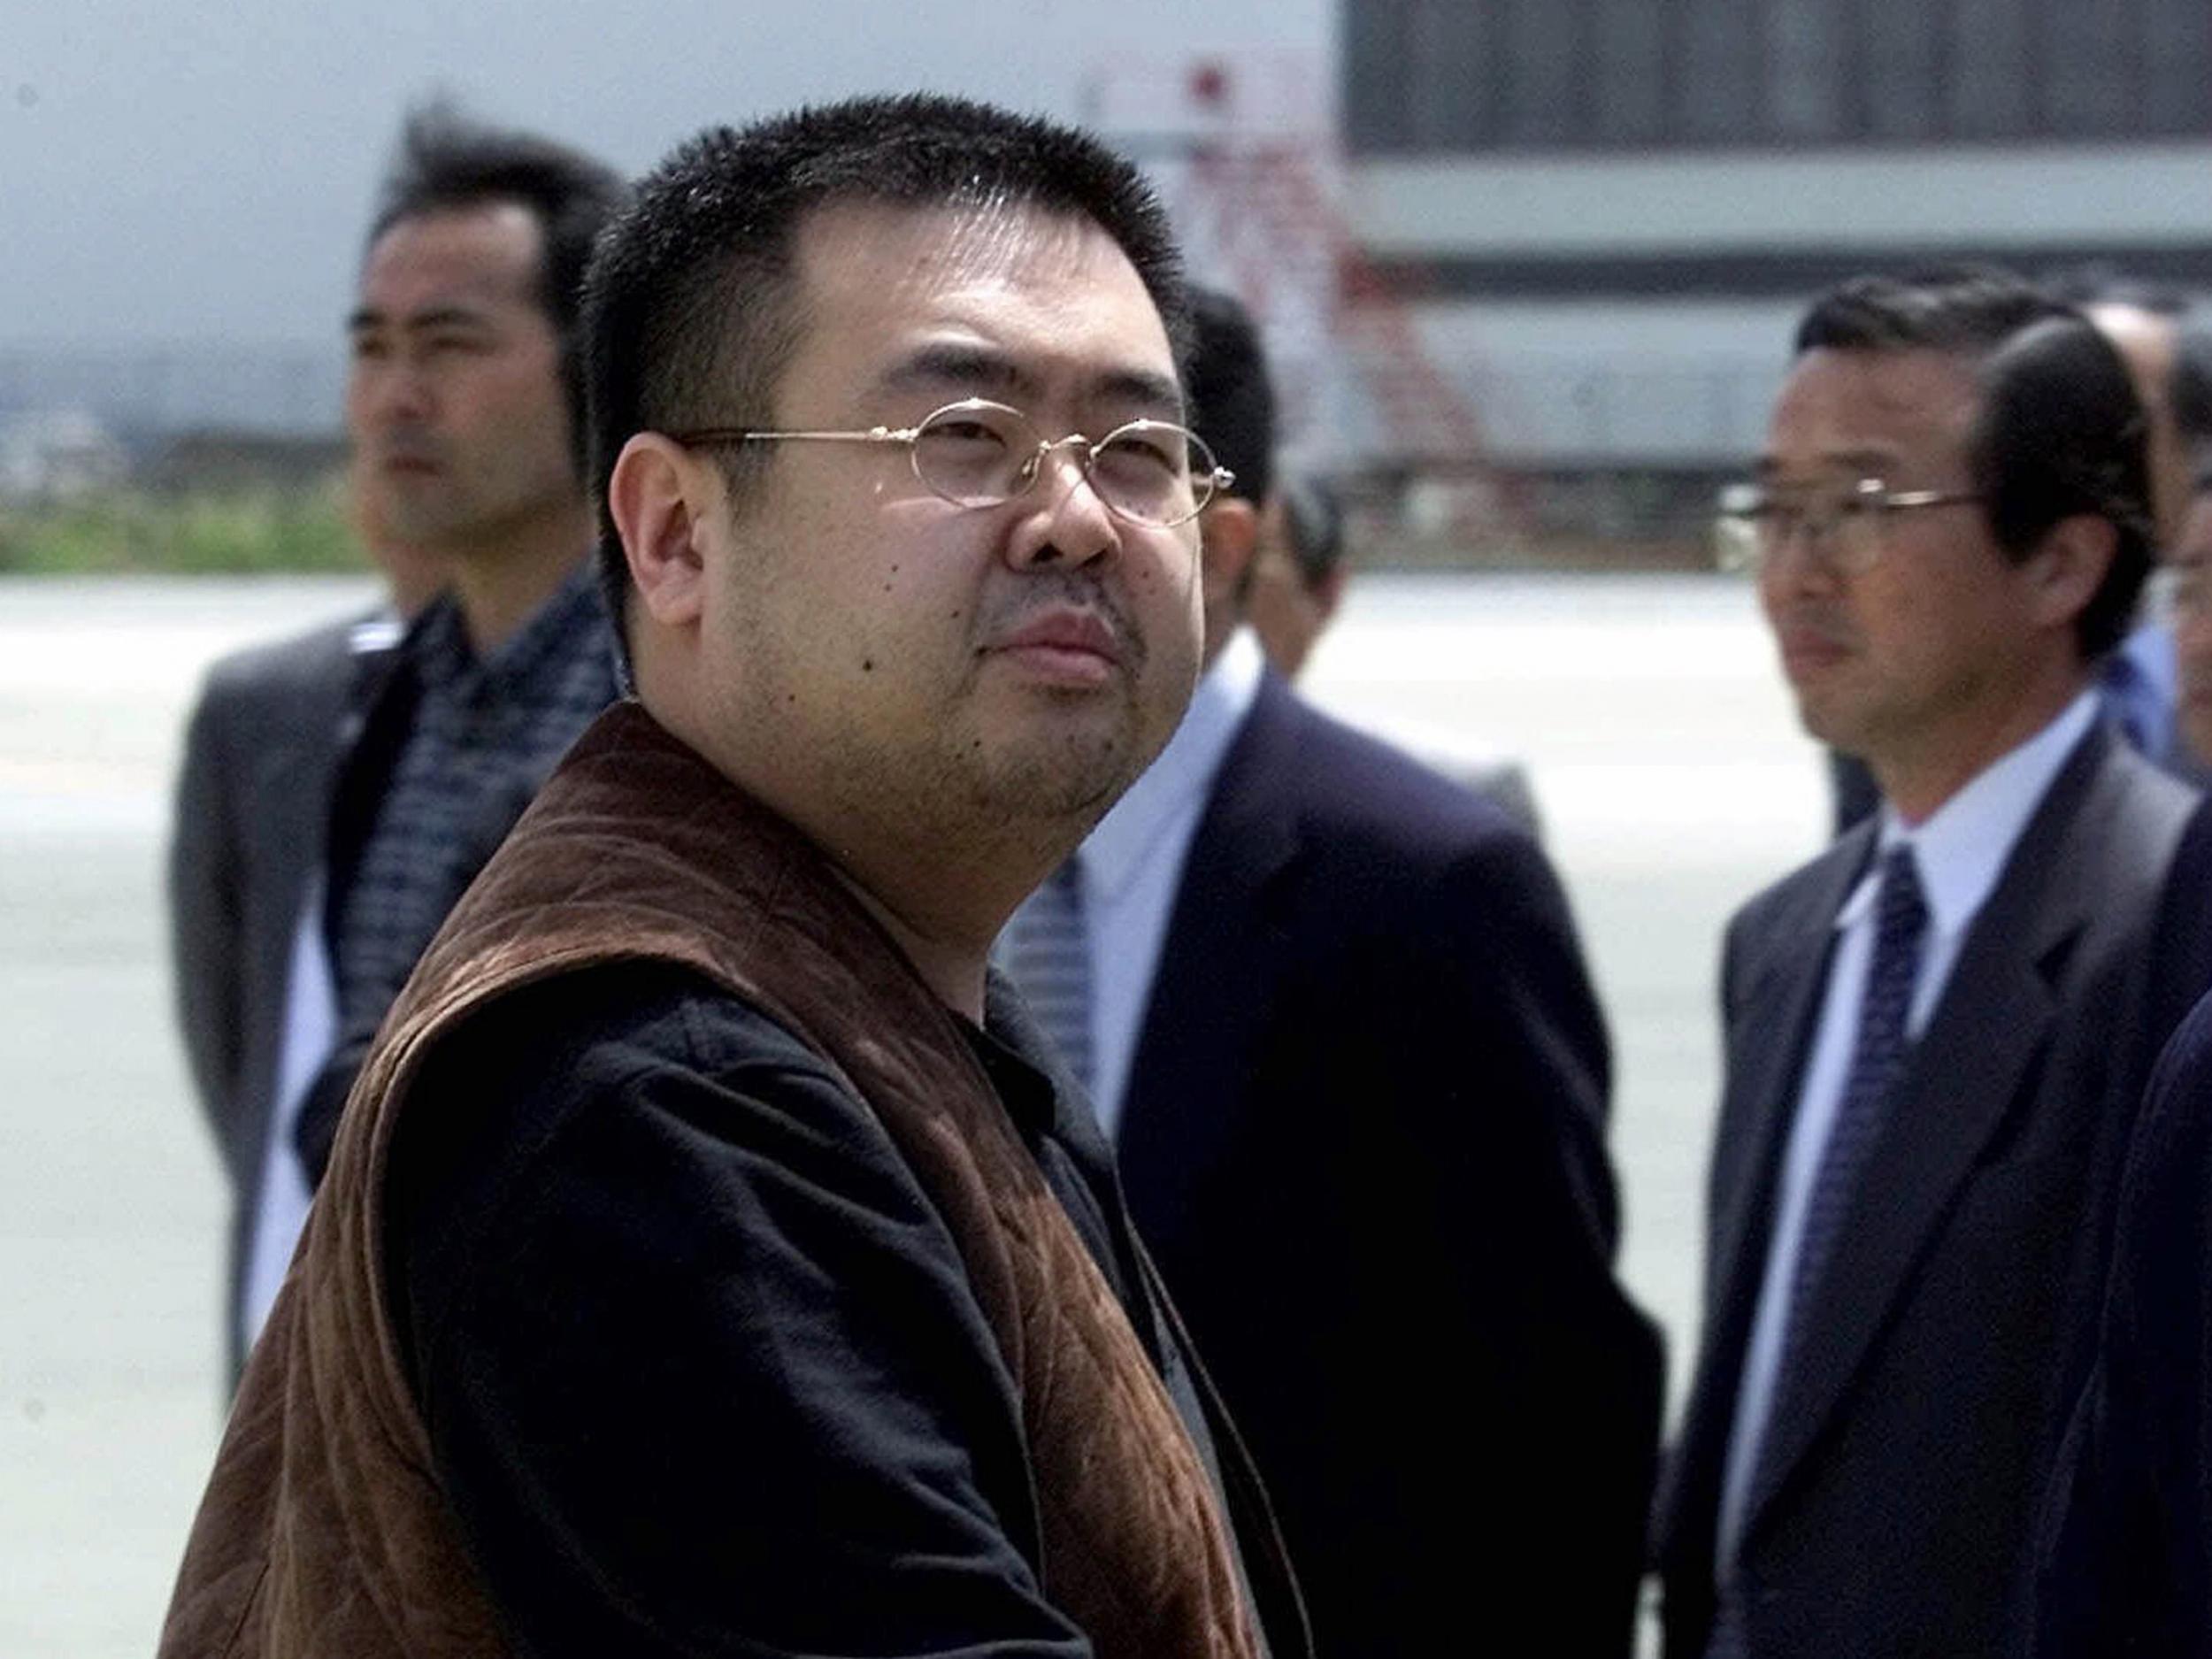 Kim Jong-un's estranged half brother died at Kuala Lumpur airport after he collapsed while waiting to board a flight